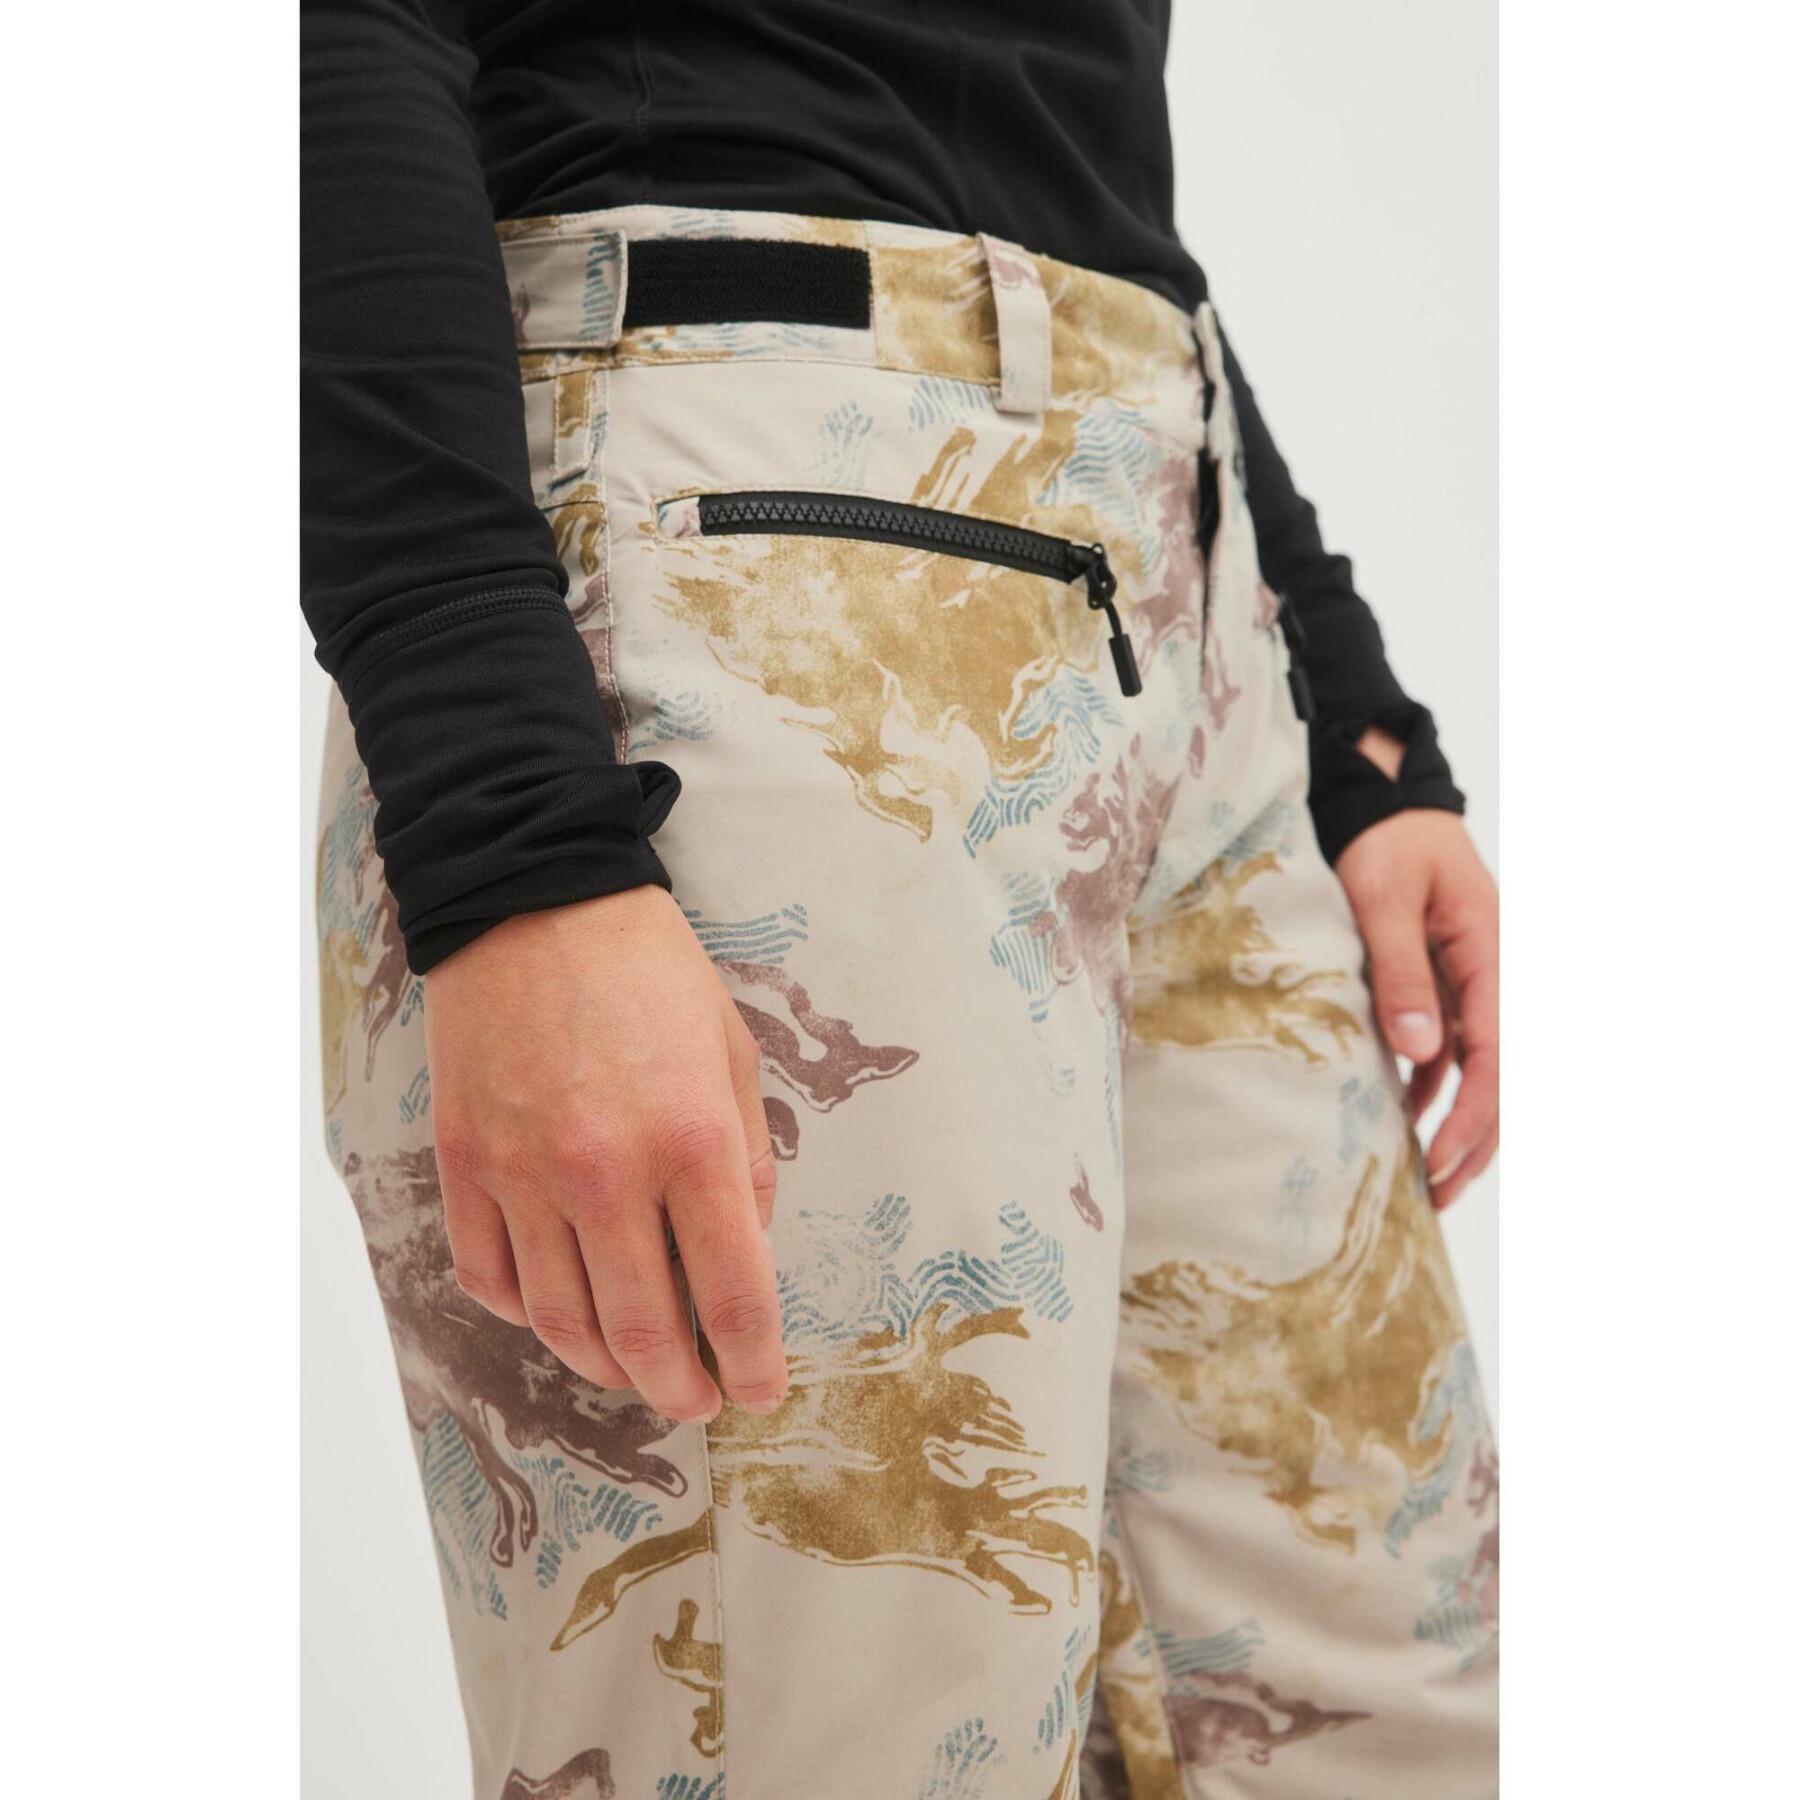 Women's pants O'Neill Glamour Insulated